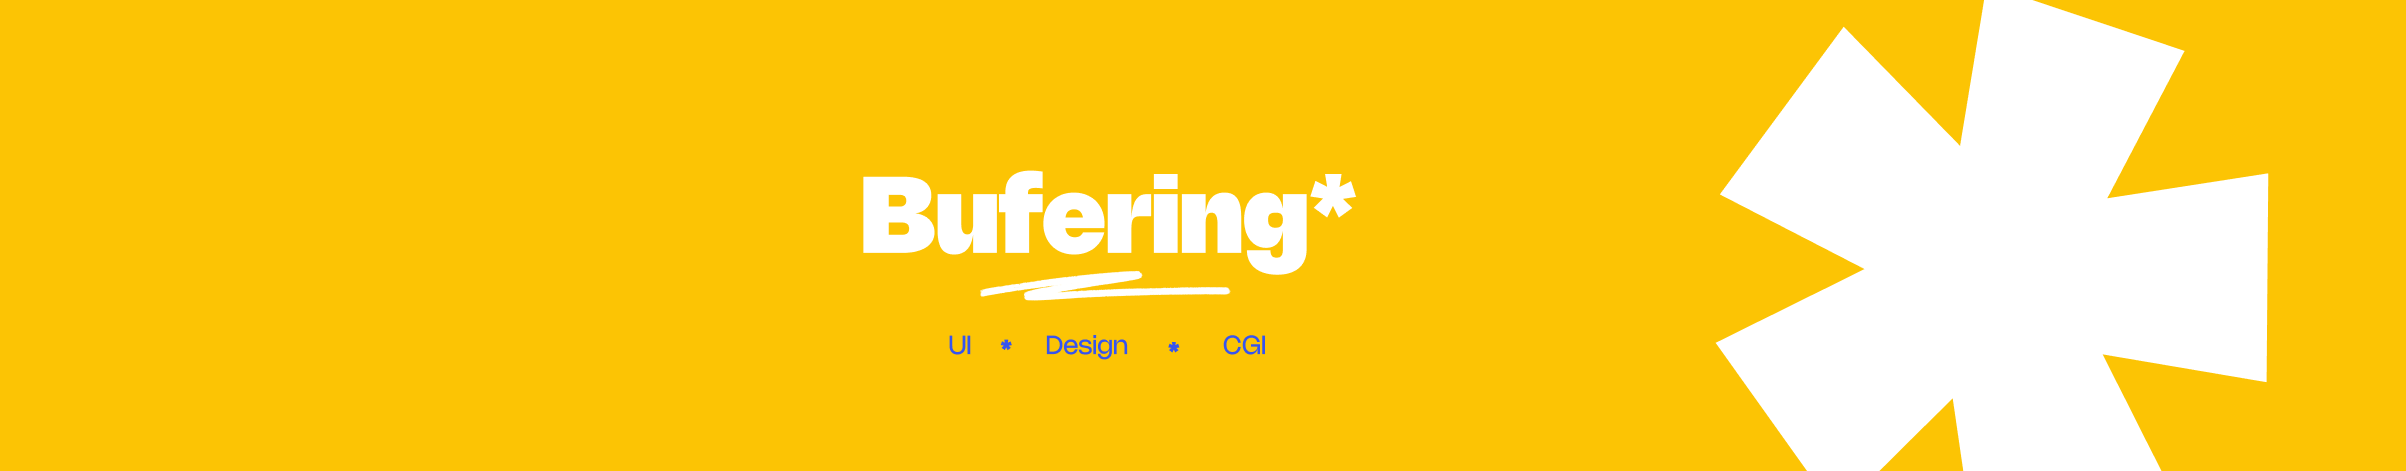 Bufering *'s profile banner